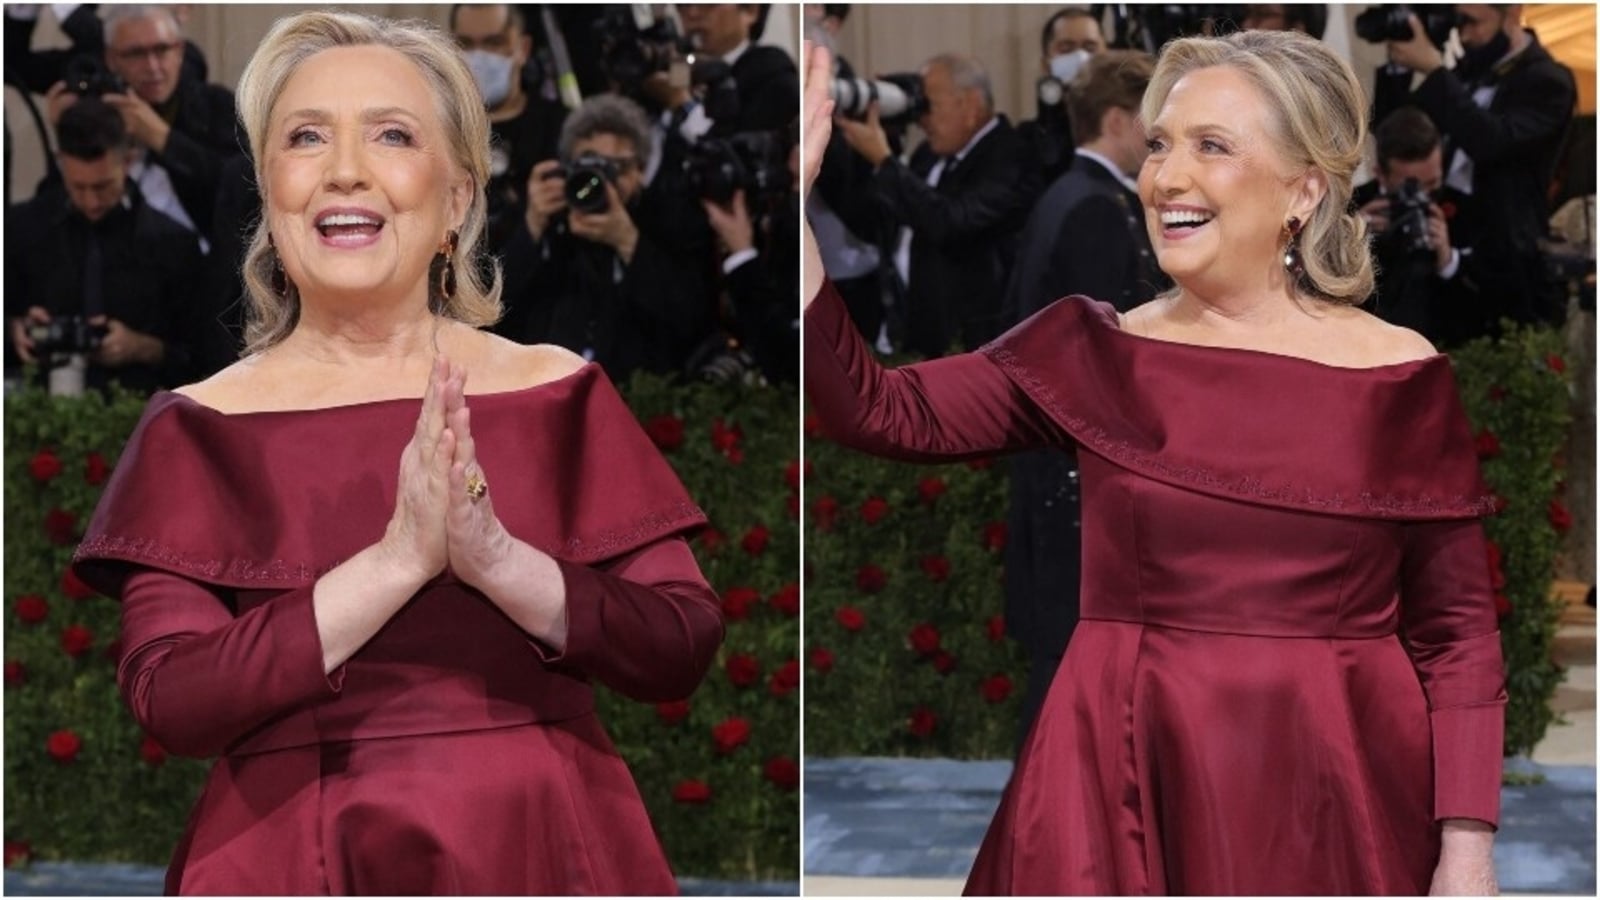 Met Gala 2022: Hillary Clinton returns to Met Gala after 21 years in a gown with secret embroidery honouring women